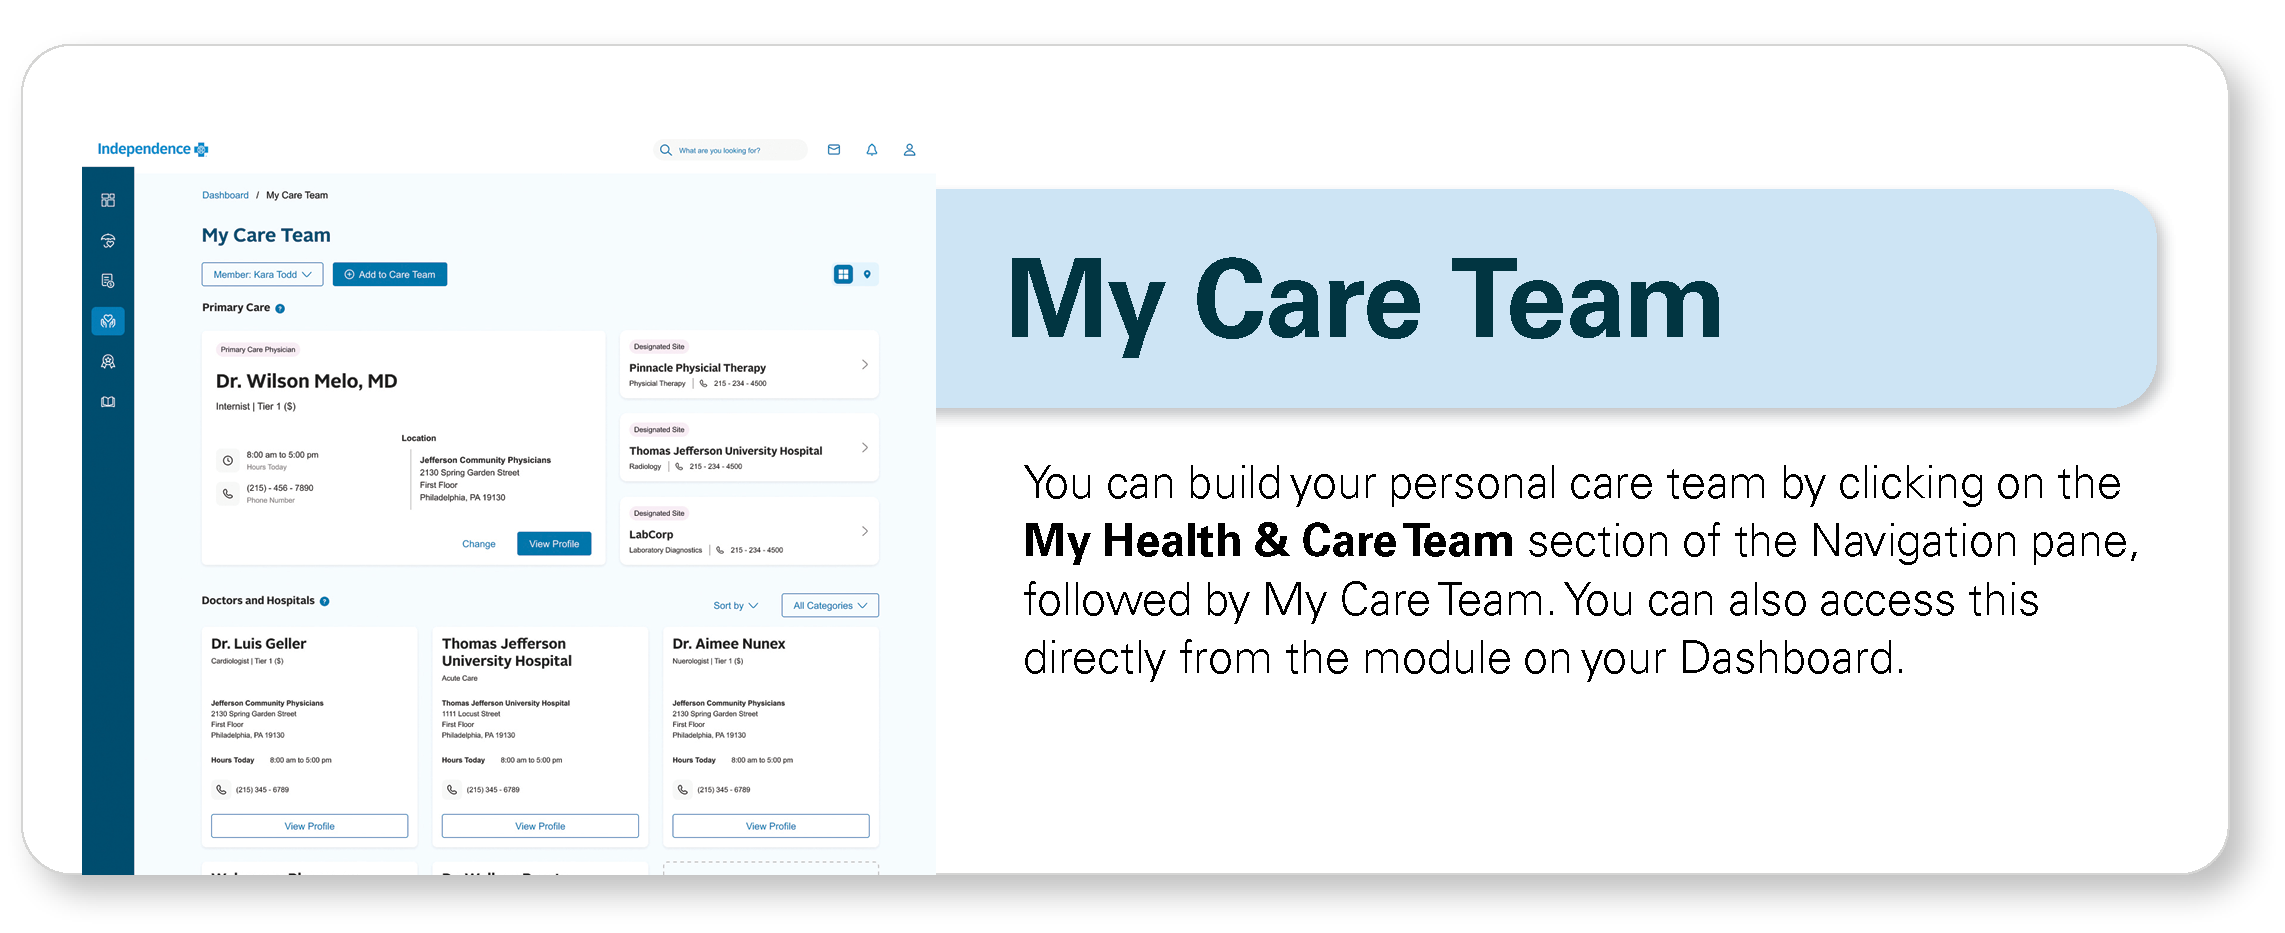 My Care Team infographic